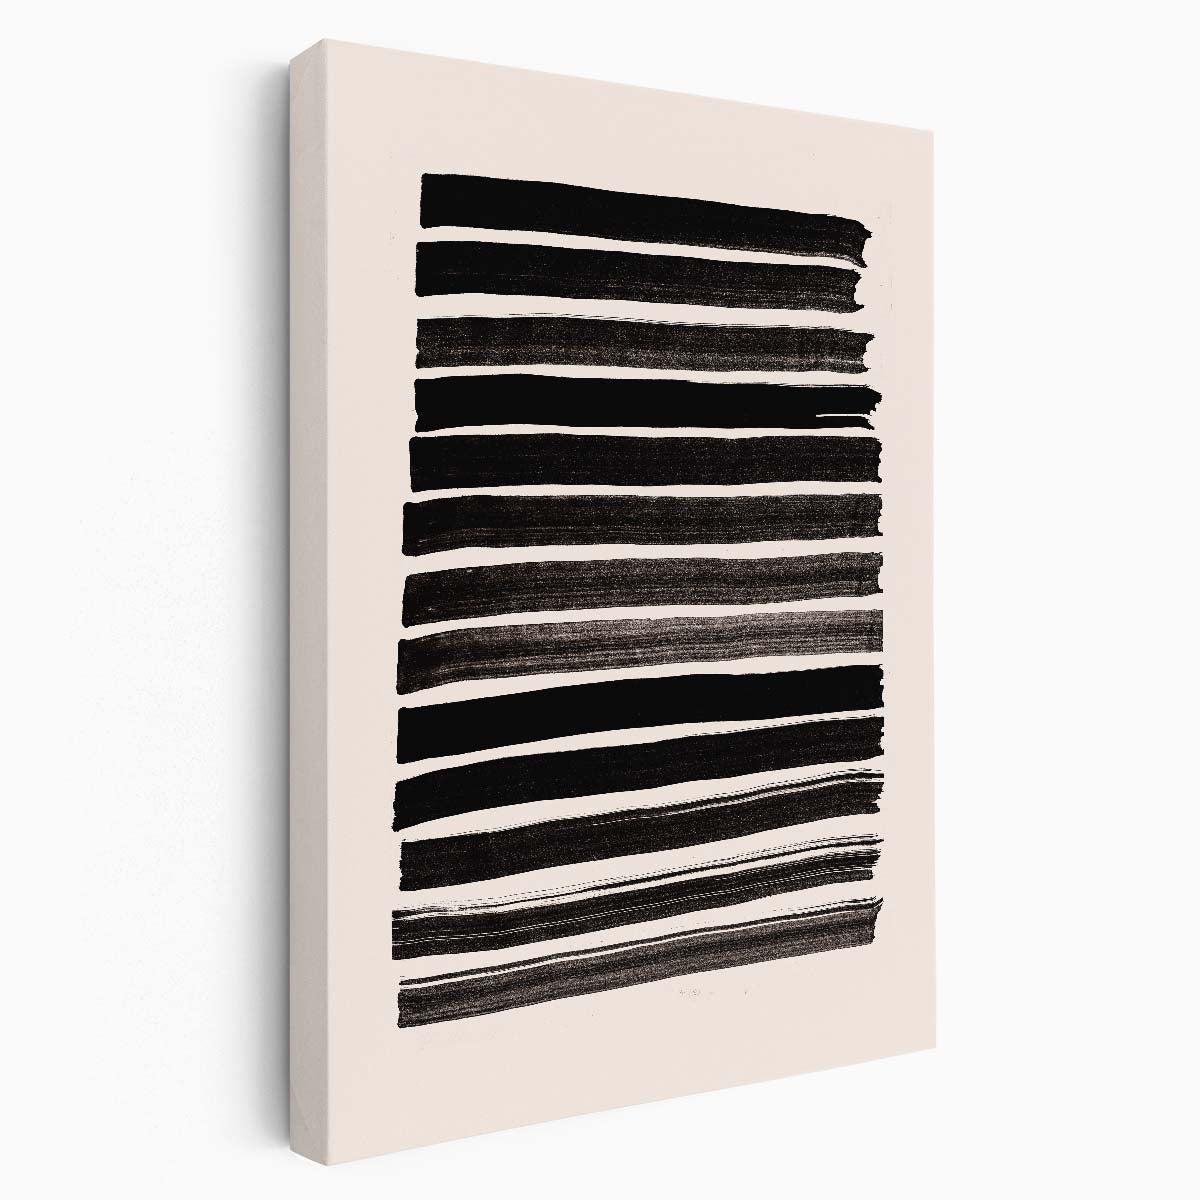 Abstract Geometric Line Art Illustration in Beige & Black Stripes by Luxuriance Designs, made in USA